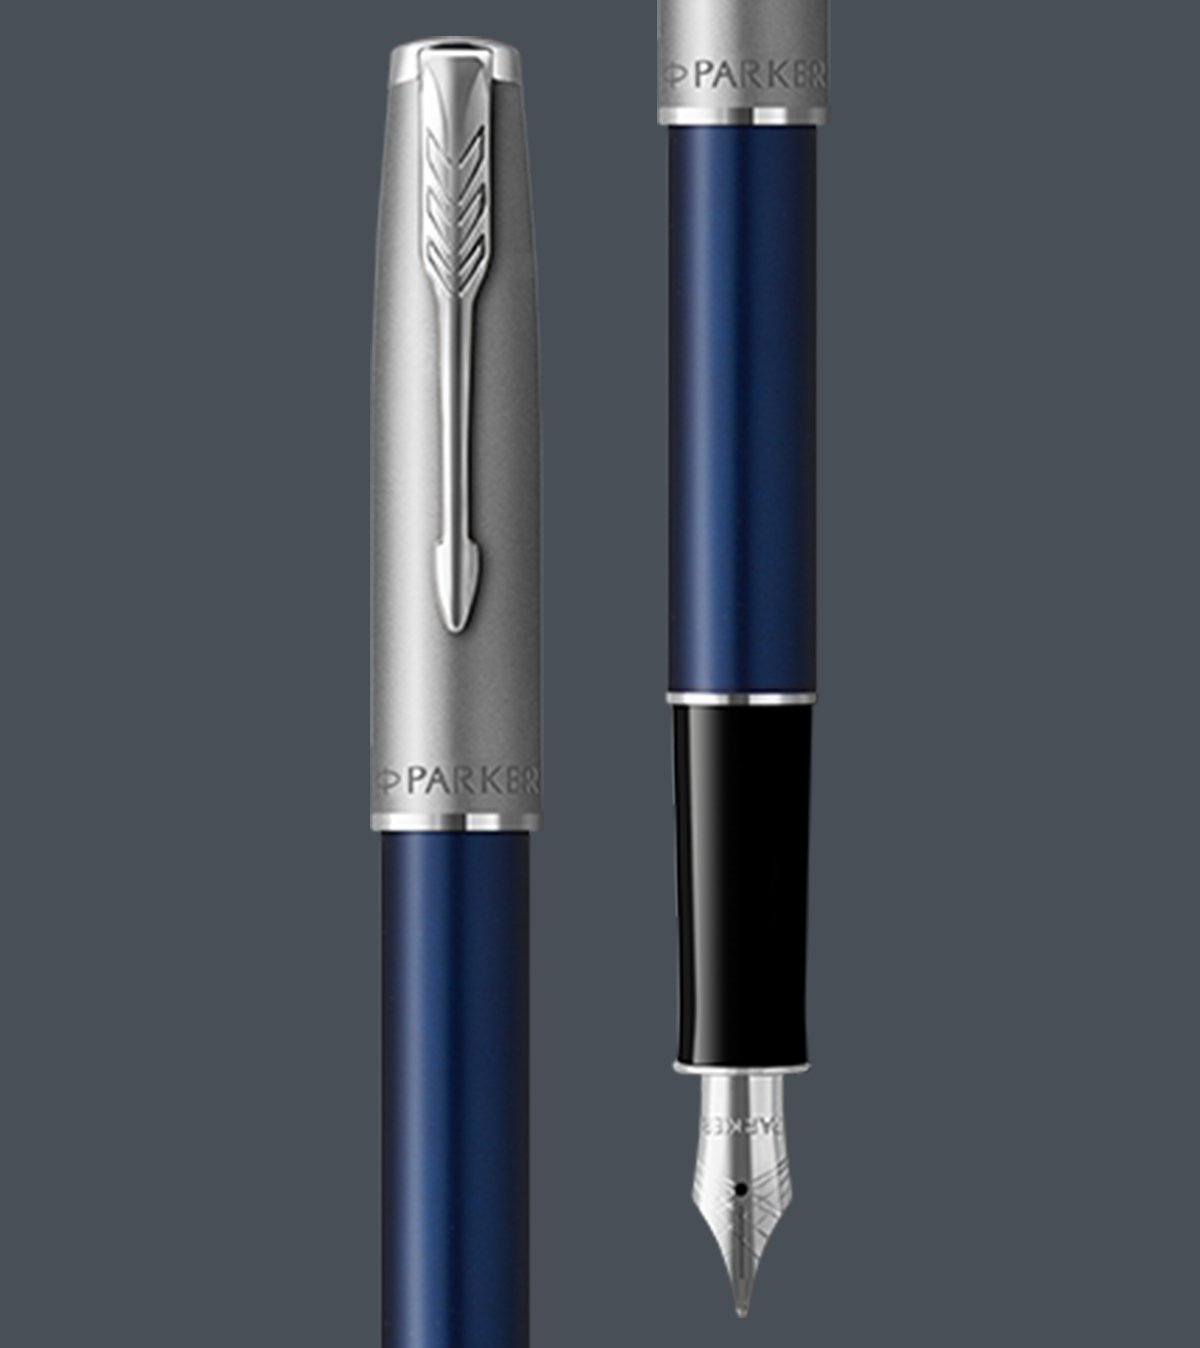 Two upright Sonnet fountain pens with chrome trim.